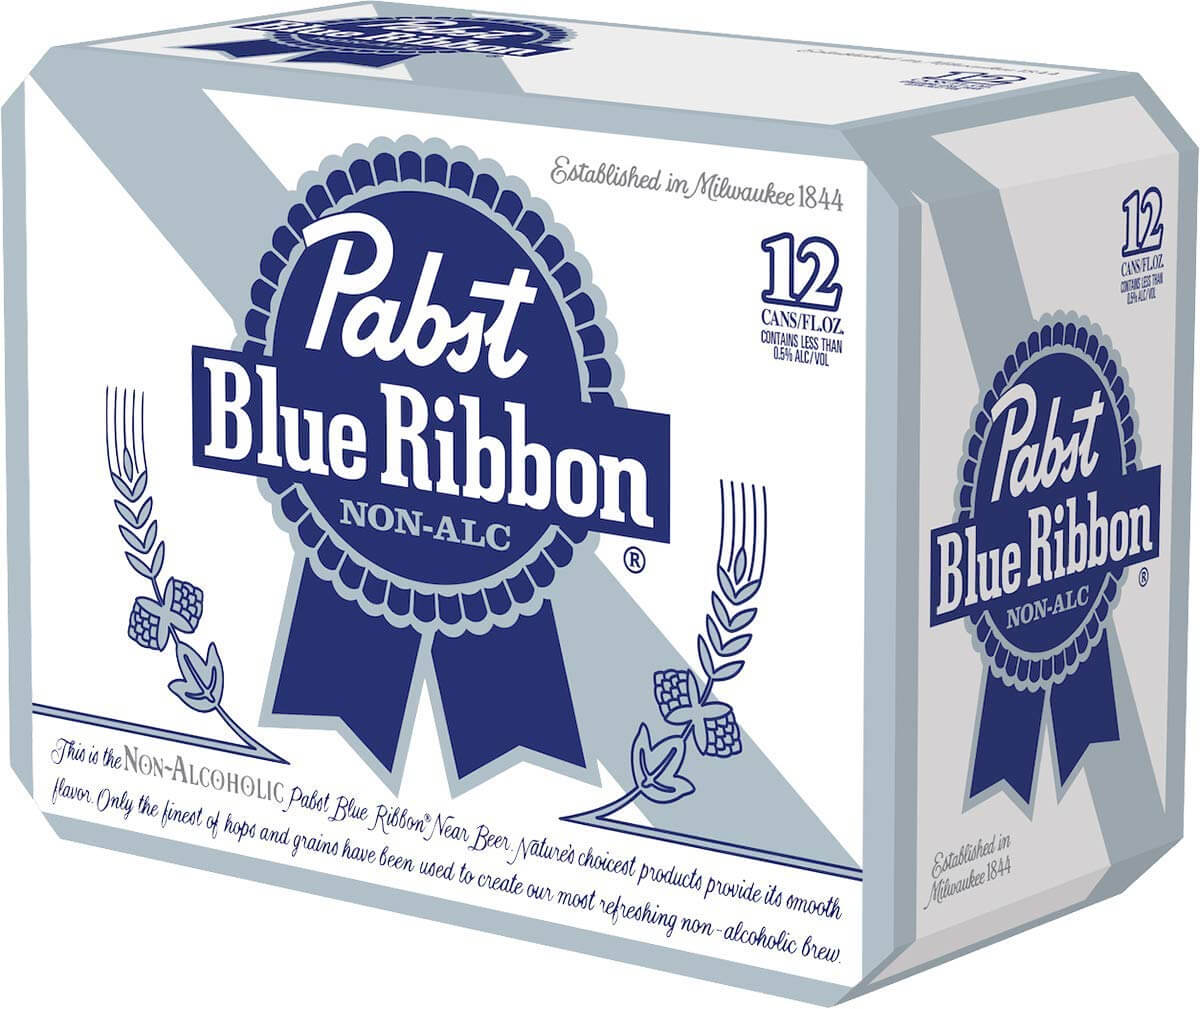 Pabst Blue Ribbon Non-alcoholic Beer